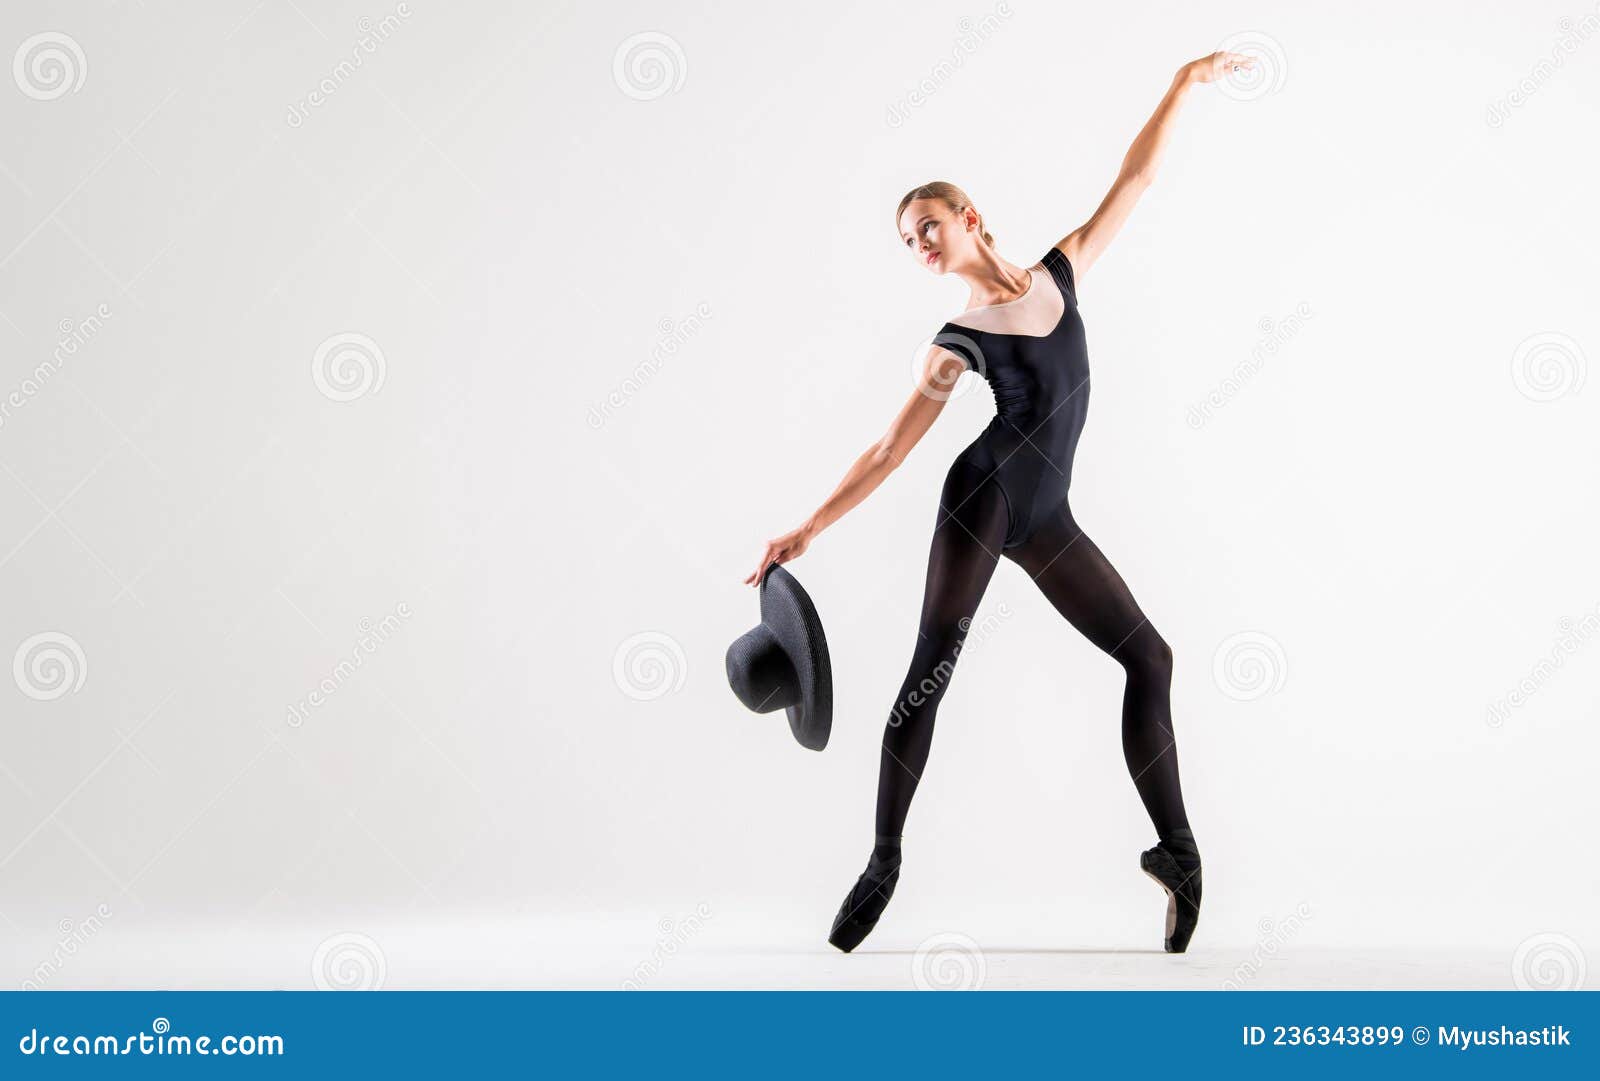 Young Ballerina in Black Pointe Shoes and Black Bondage Costume Posing on  White Background with Hat in Hand Stock Image - Image of copy, dancing:  236343899